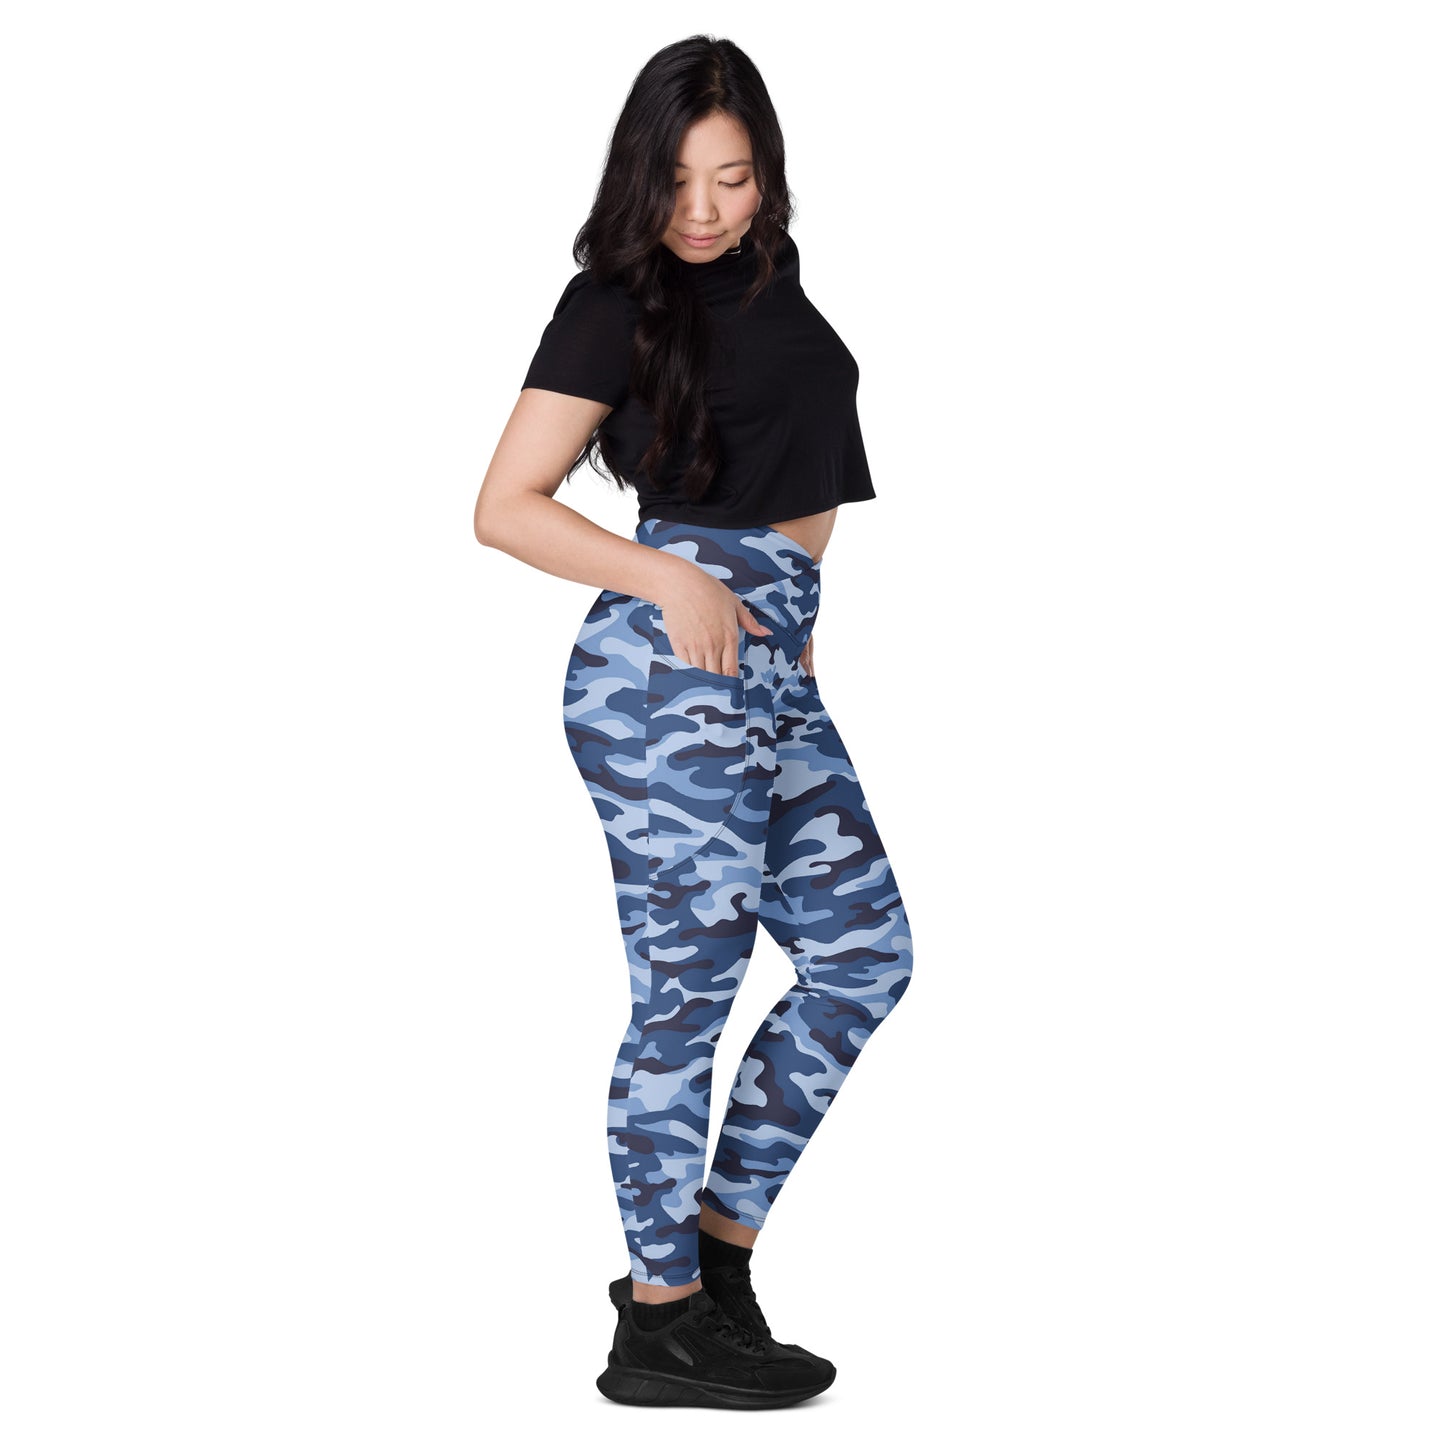 Crossover leggings with pockets - Blue Camouflage